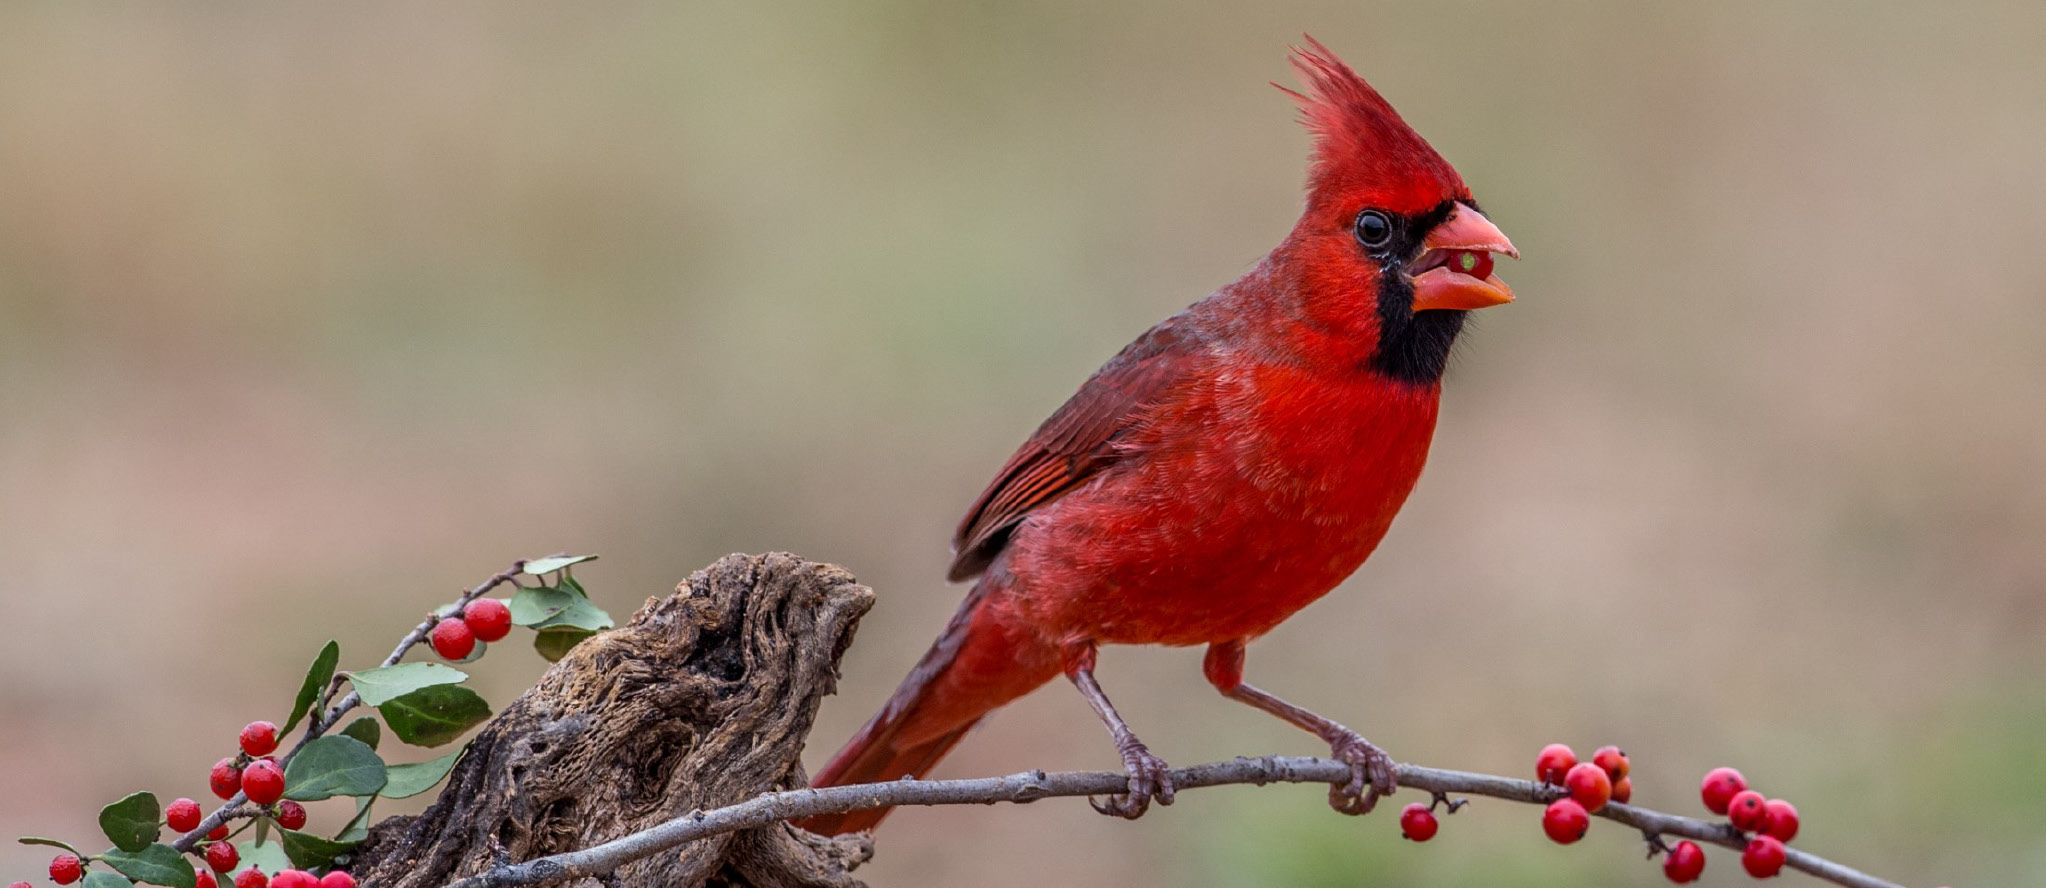 Northern cardinal perched on a branch.